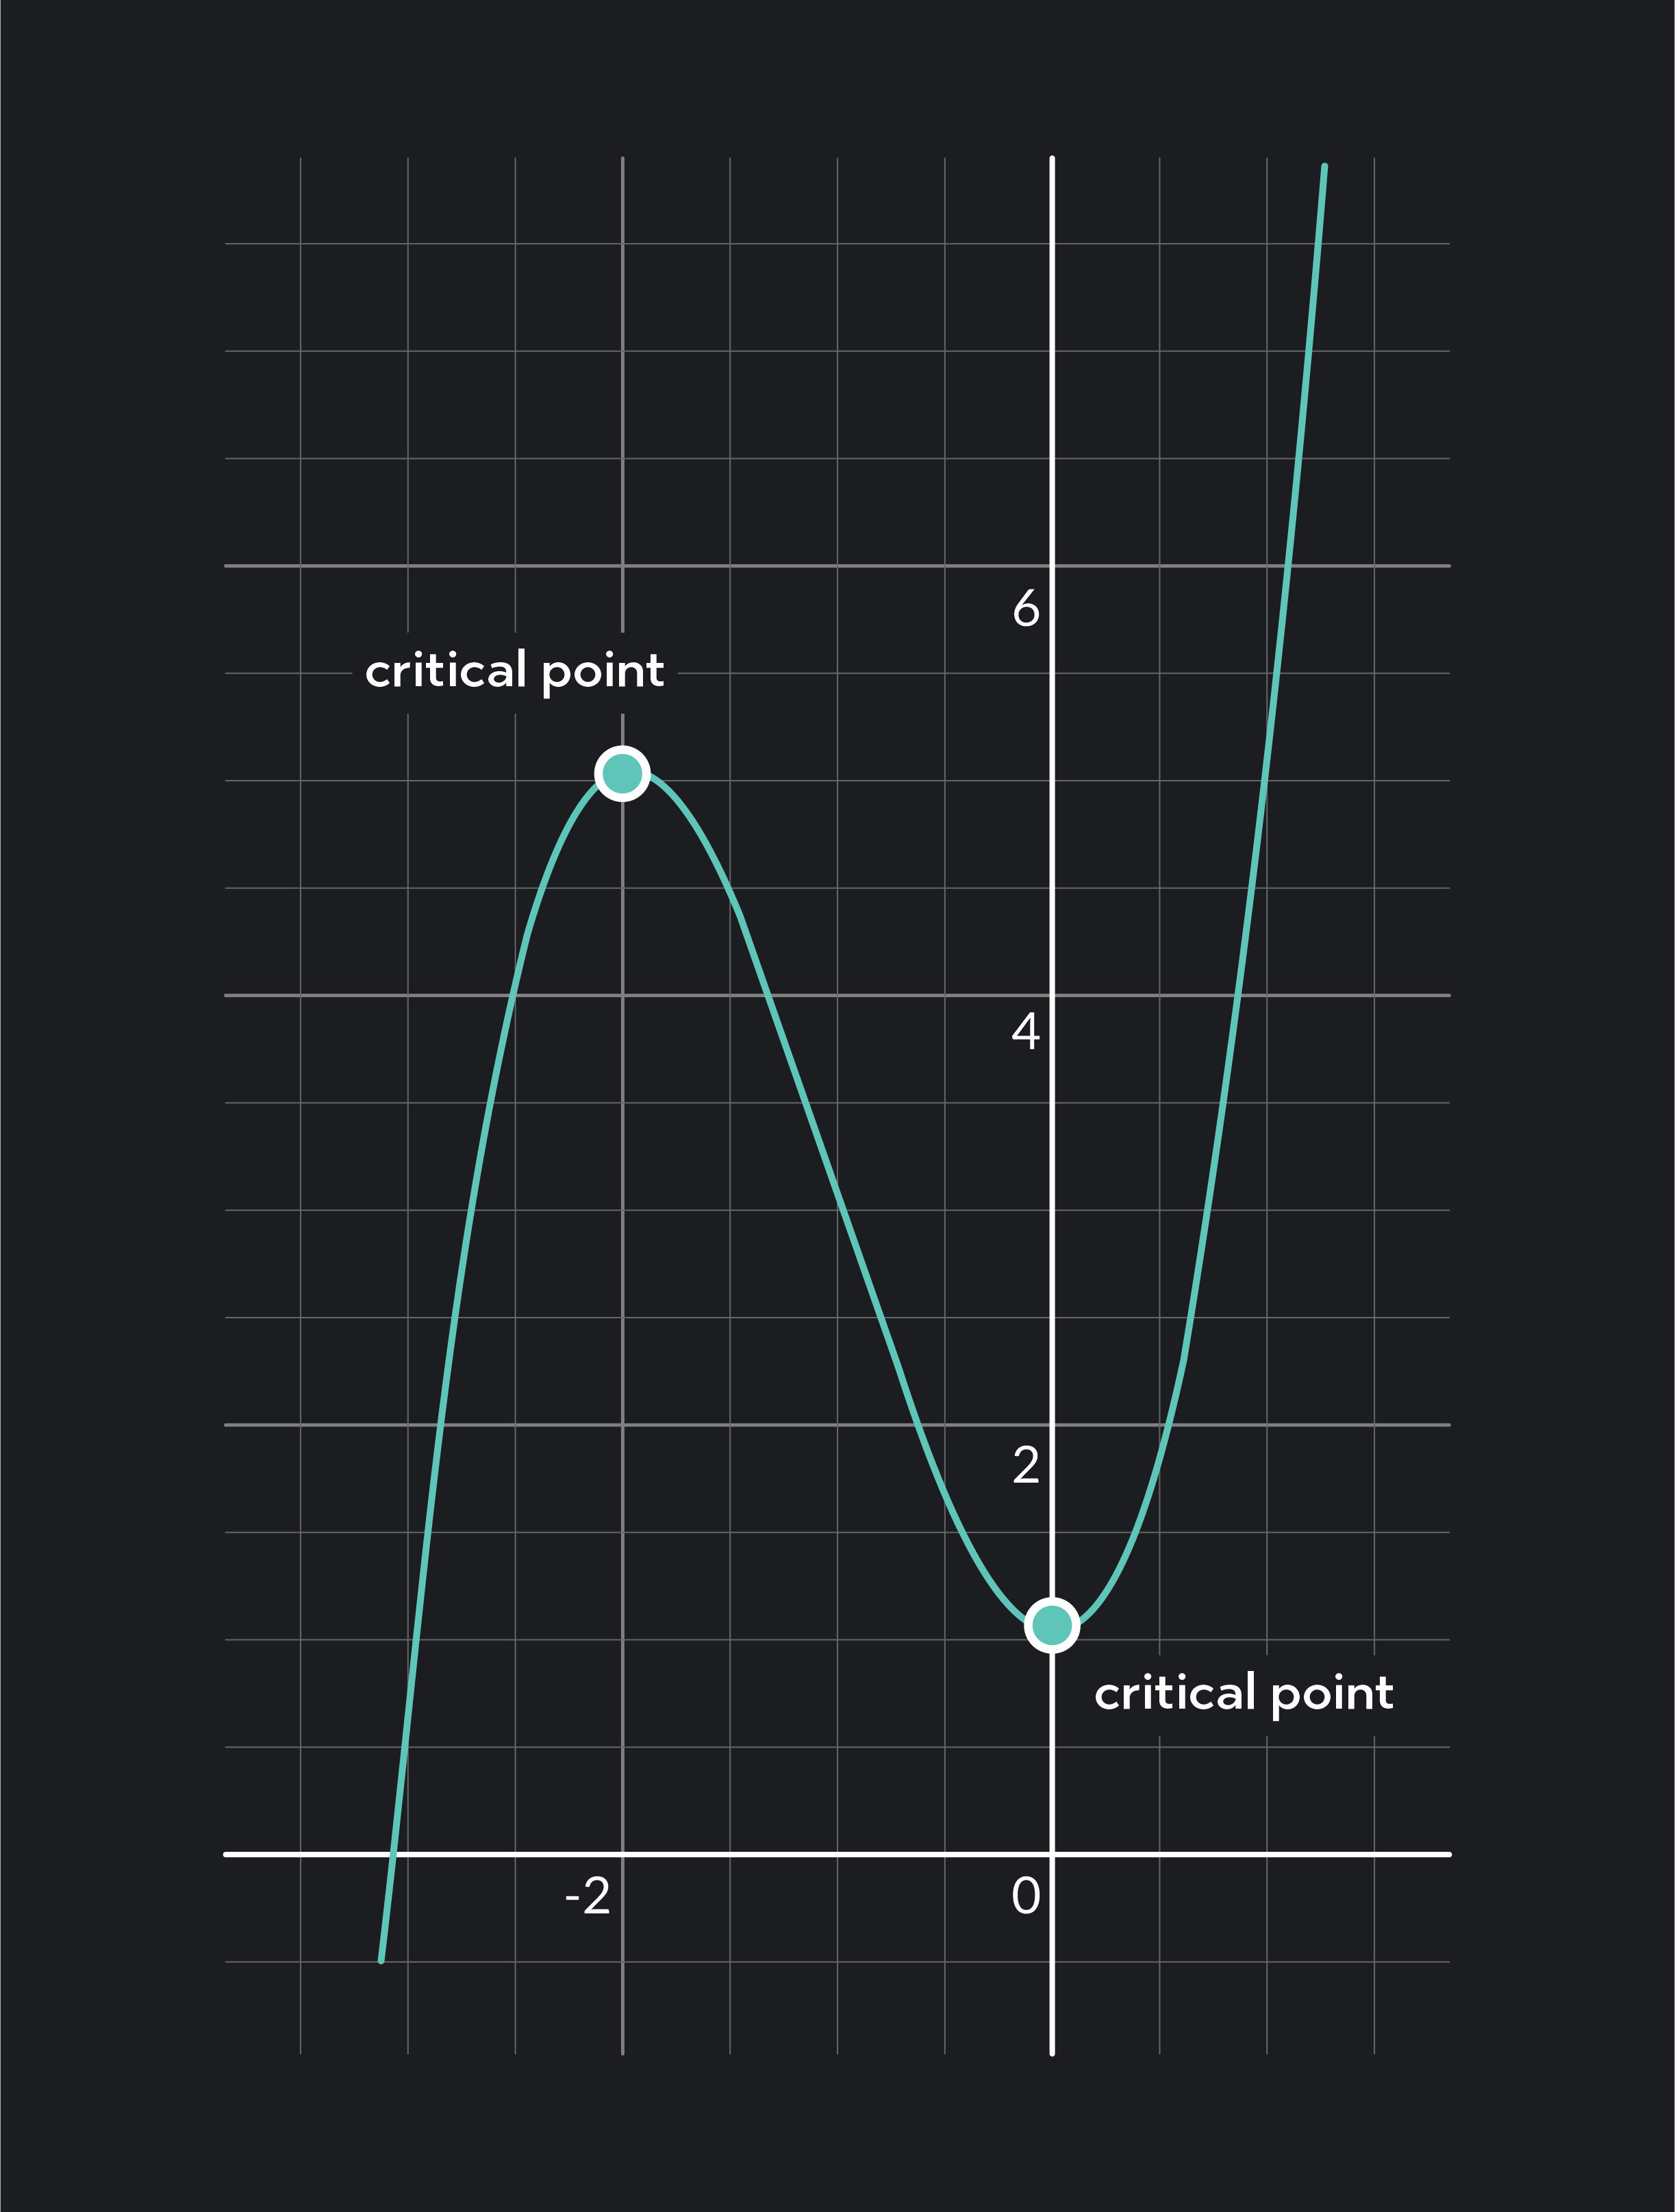 Critical points are the peaks and valleys on a graph